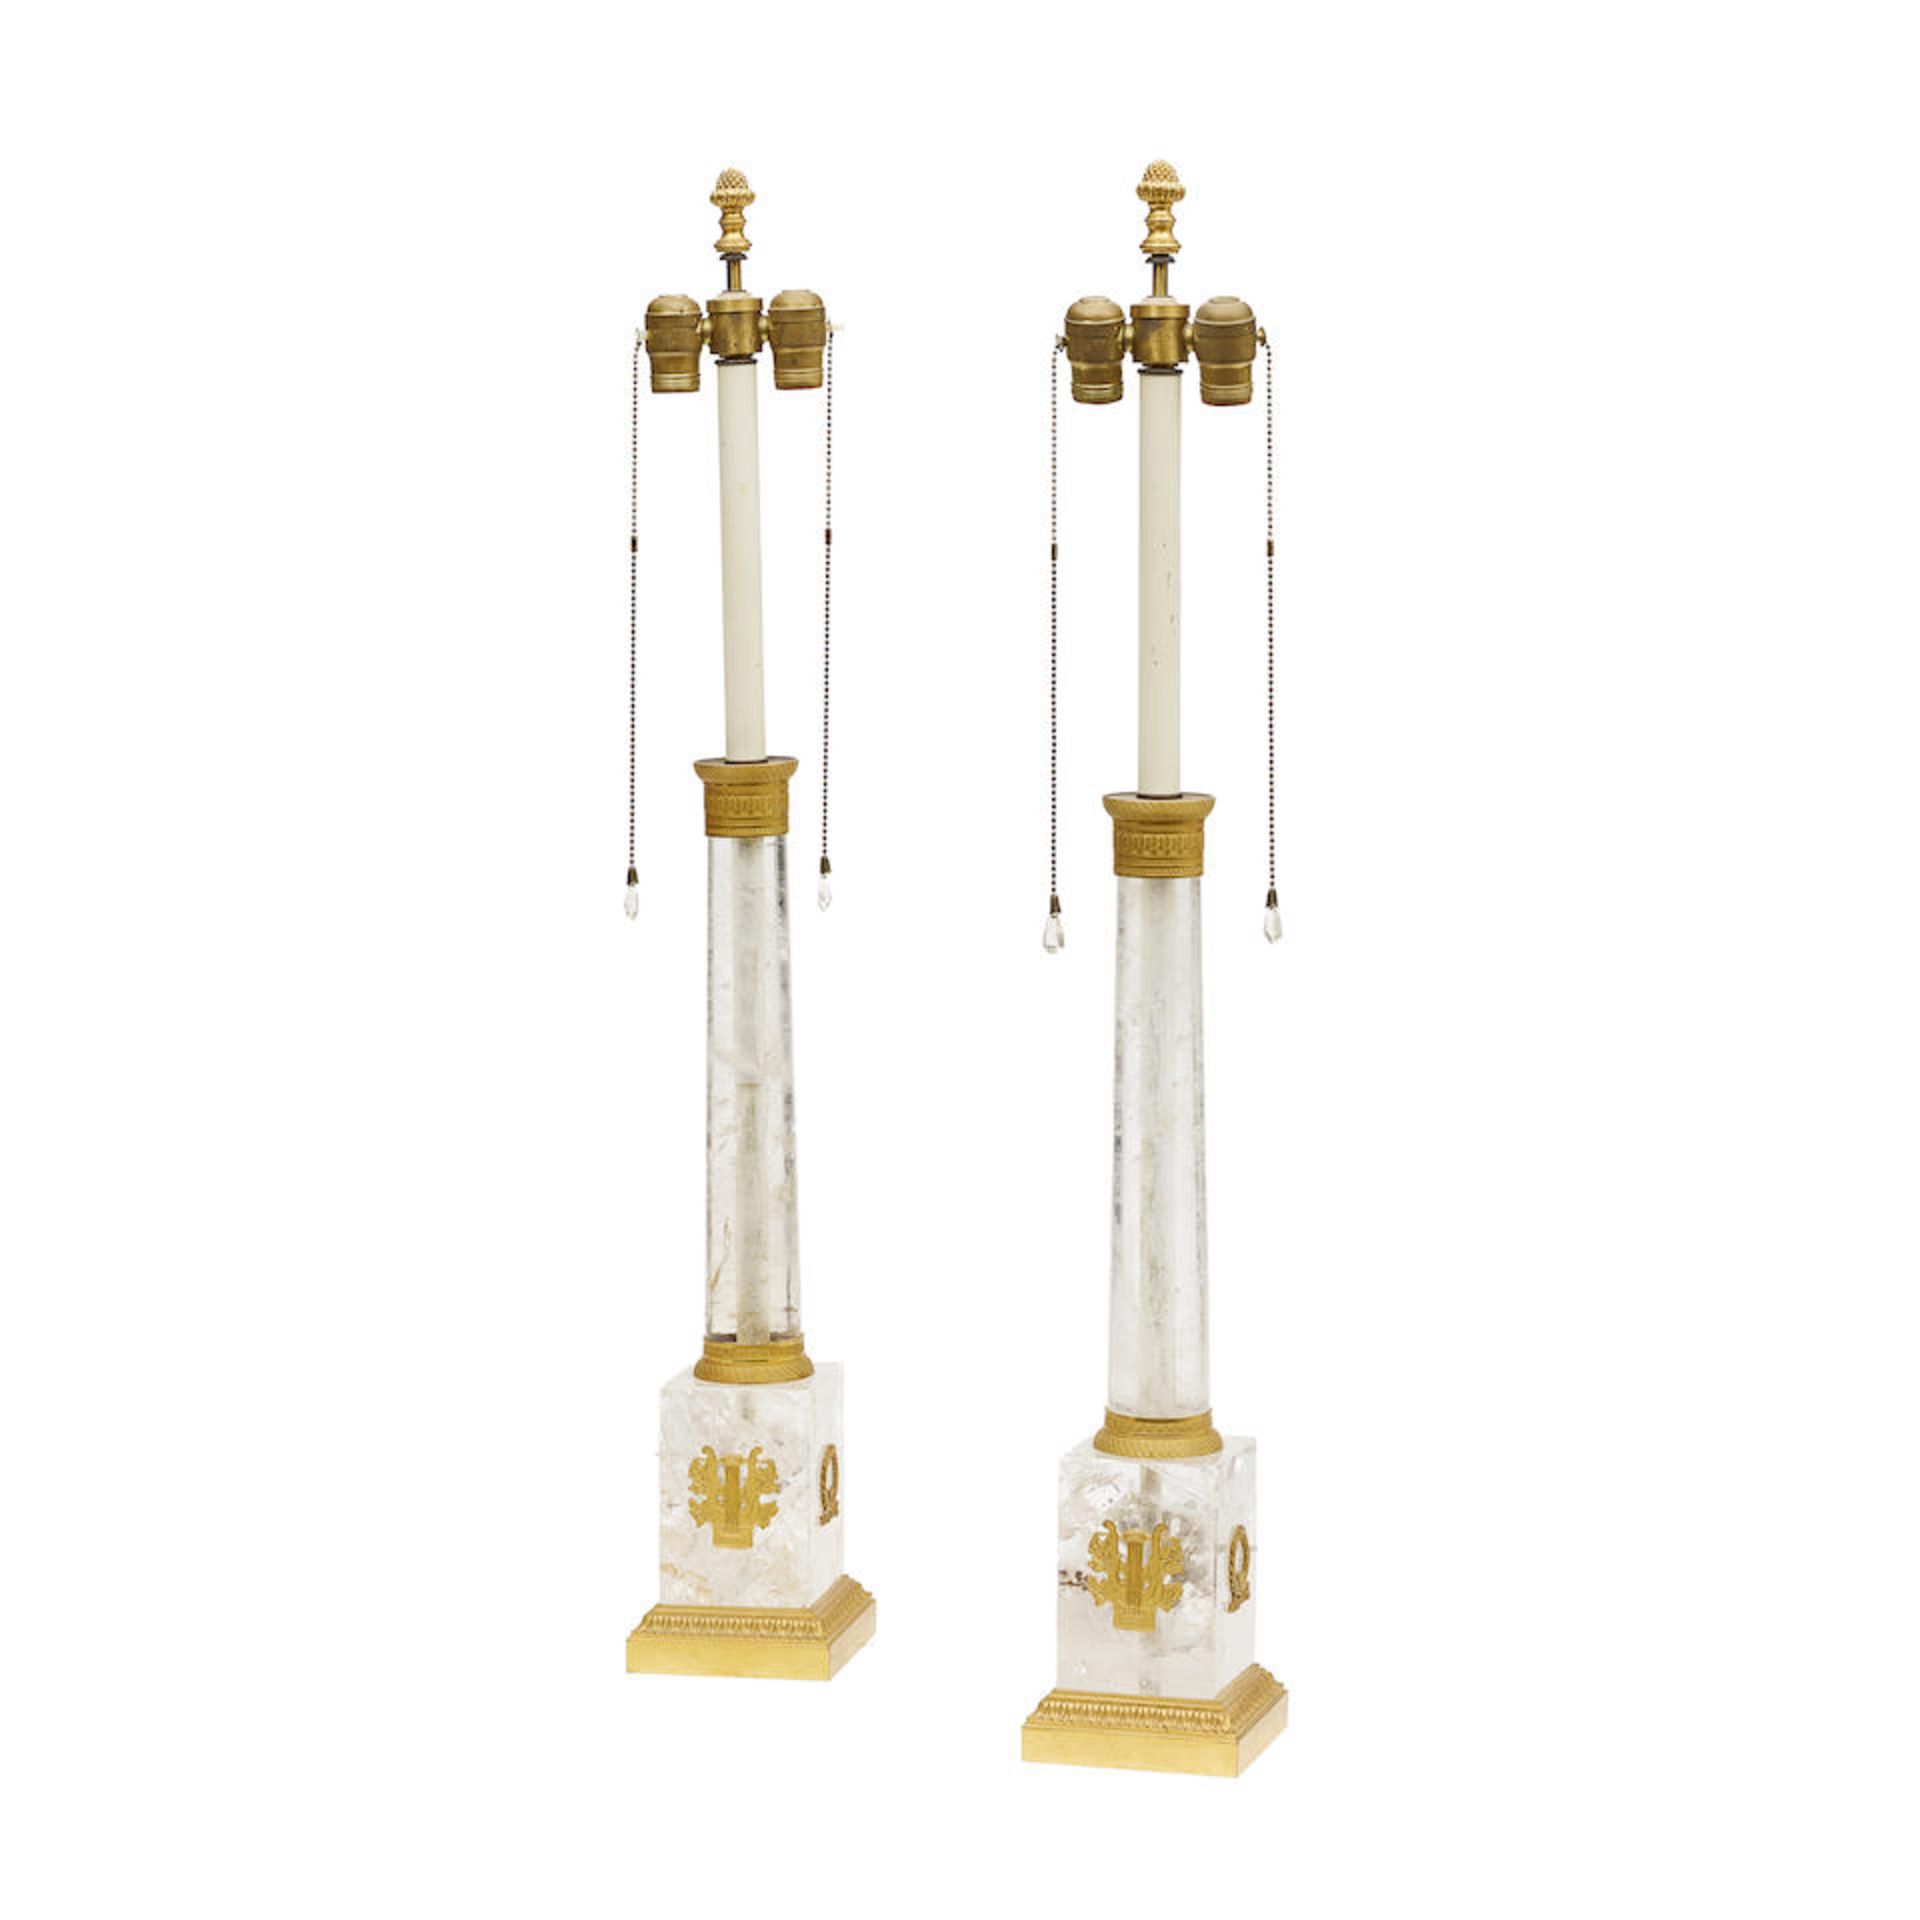 A PAIR OF NEOCLASSICAL STYLE GILT BRONZE MOUNTED ROCK CRYSTAL COLUMNAR LAMPS20th century